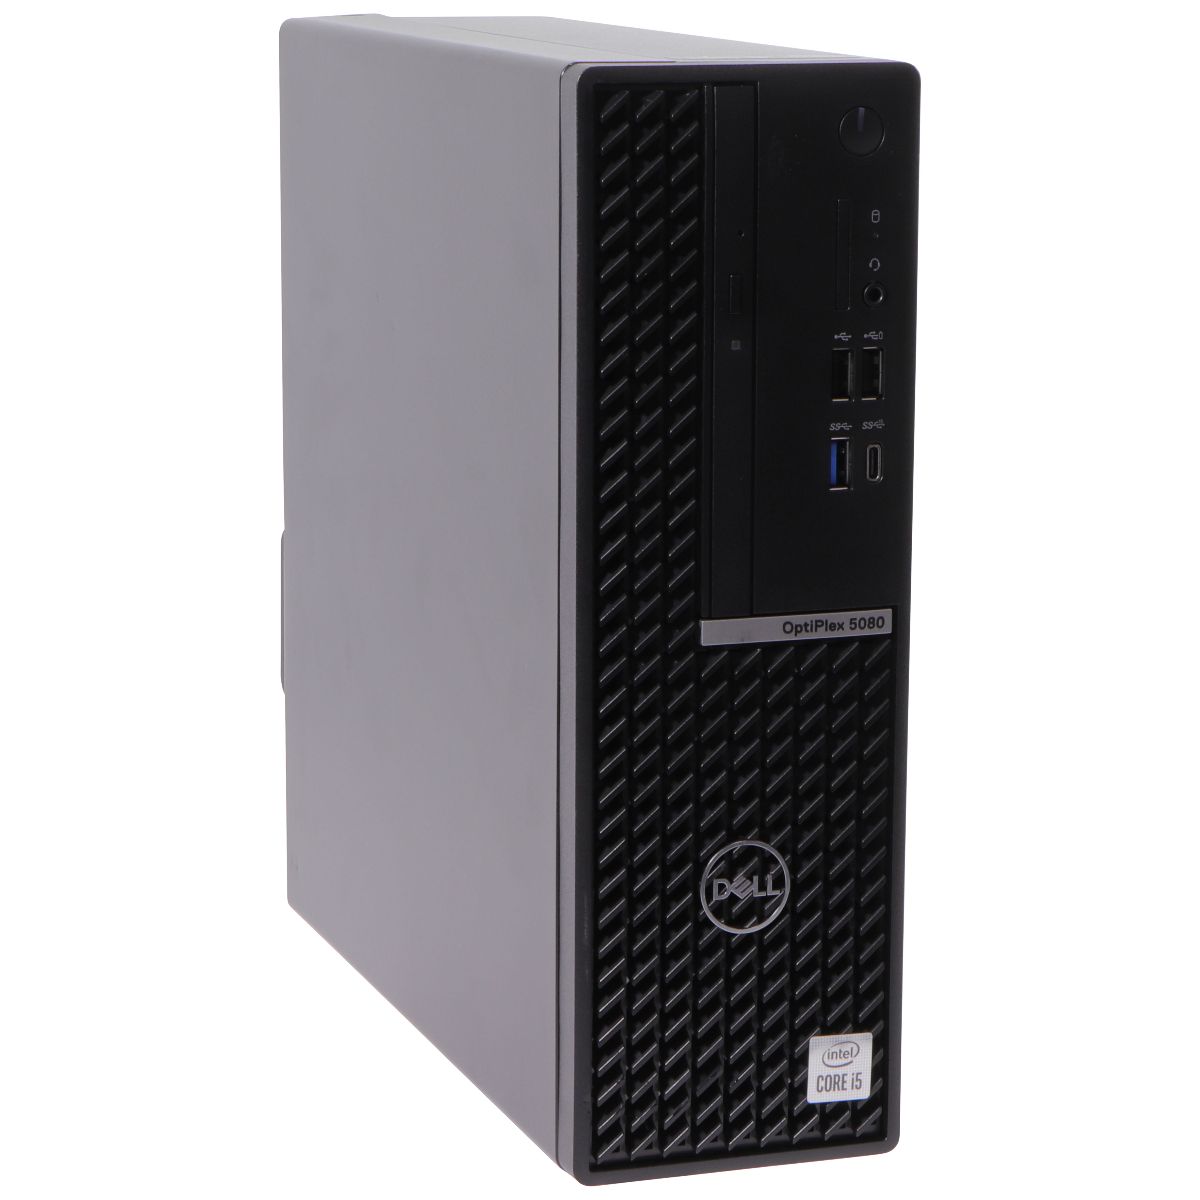 Dell Optiplex 5080 (D15S) SFF Desktop PC i5-10500/256GB SSD/16GB RAM/10 Home PC Desktops & All-In-Ones Dell    - Simple Cell Bulk Wholesale Pricing - USA Seller